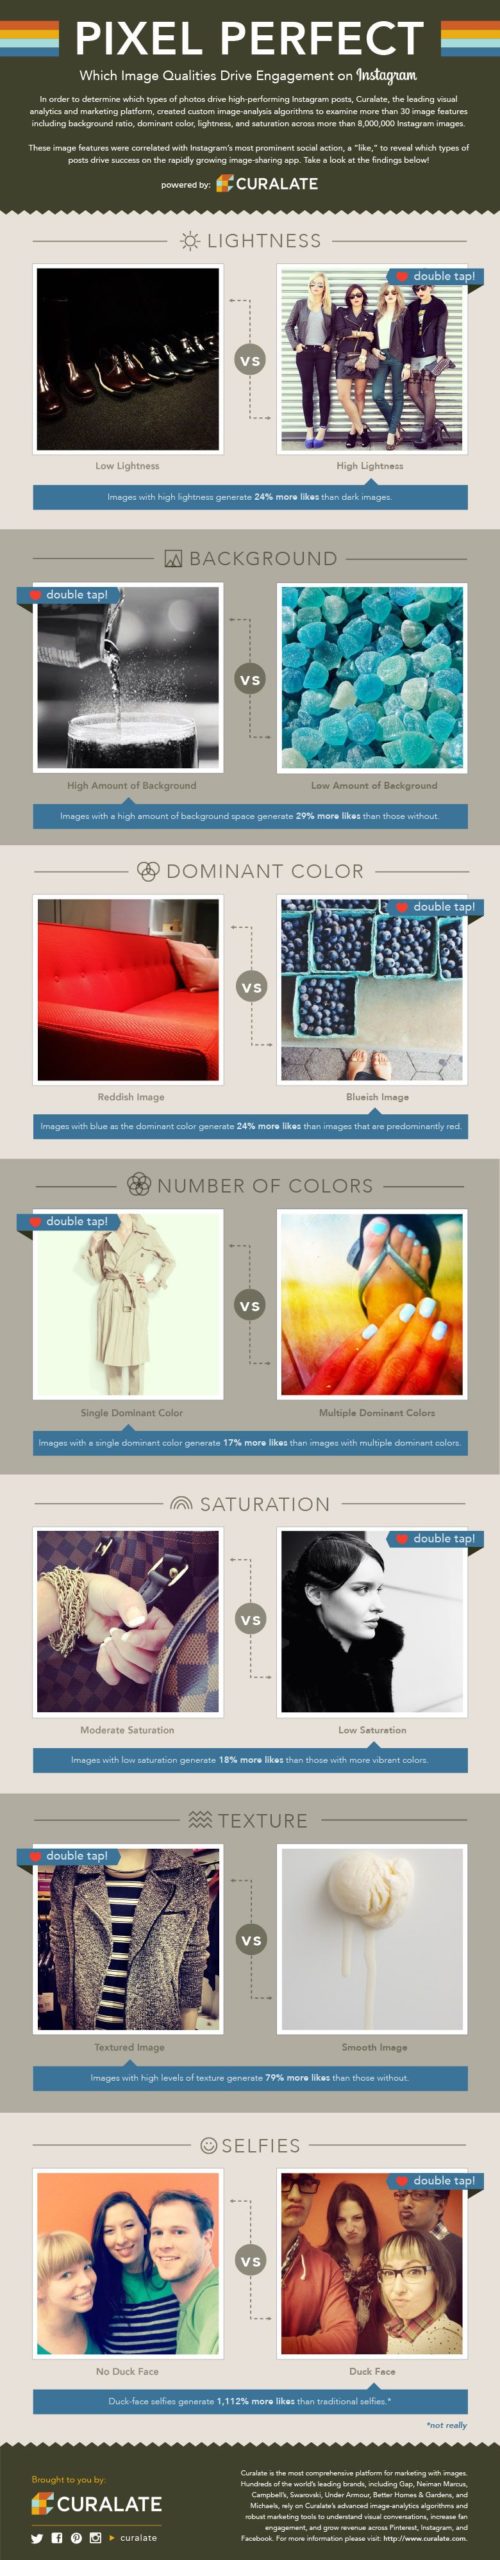 The Secret To More Instagram Likes Is Blue-Toned Photos [Infographic]